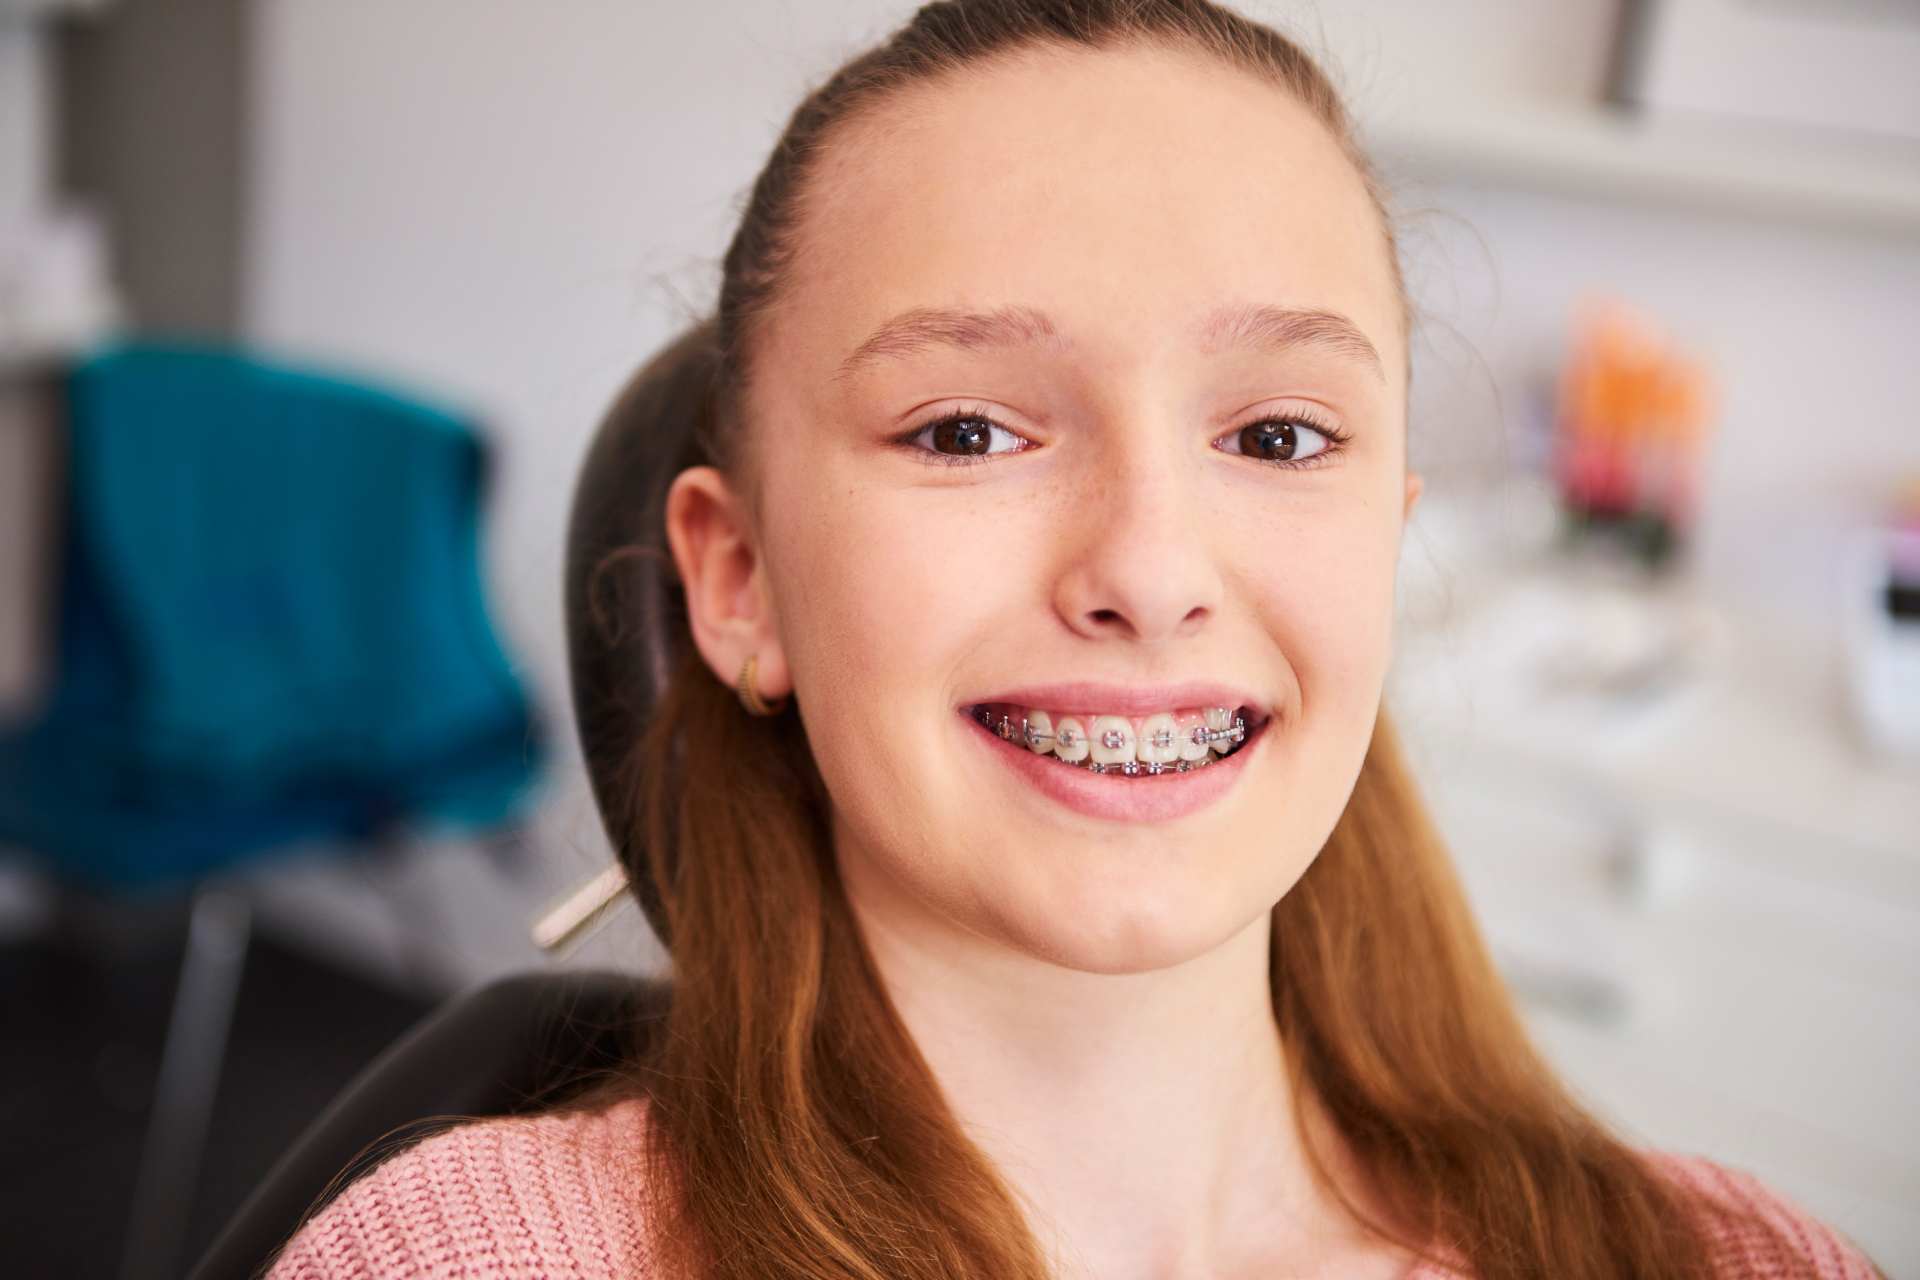 Teen smiling with braces